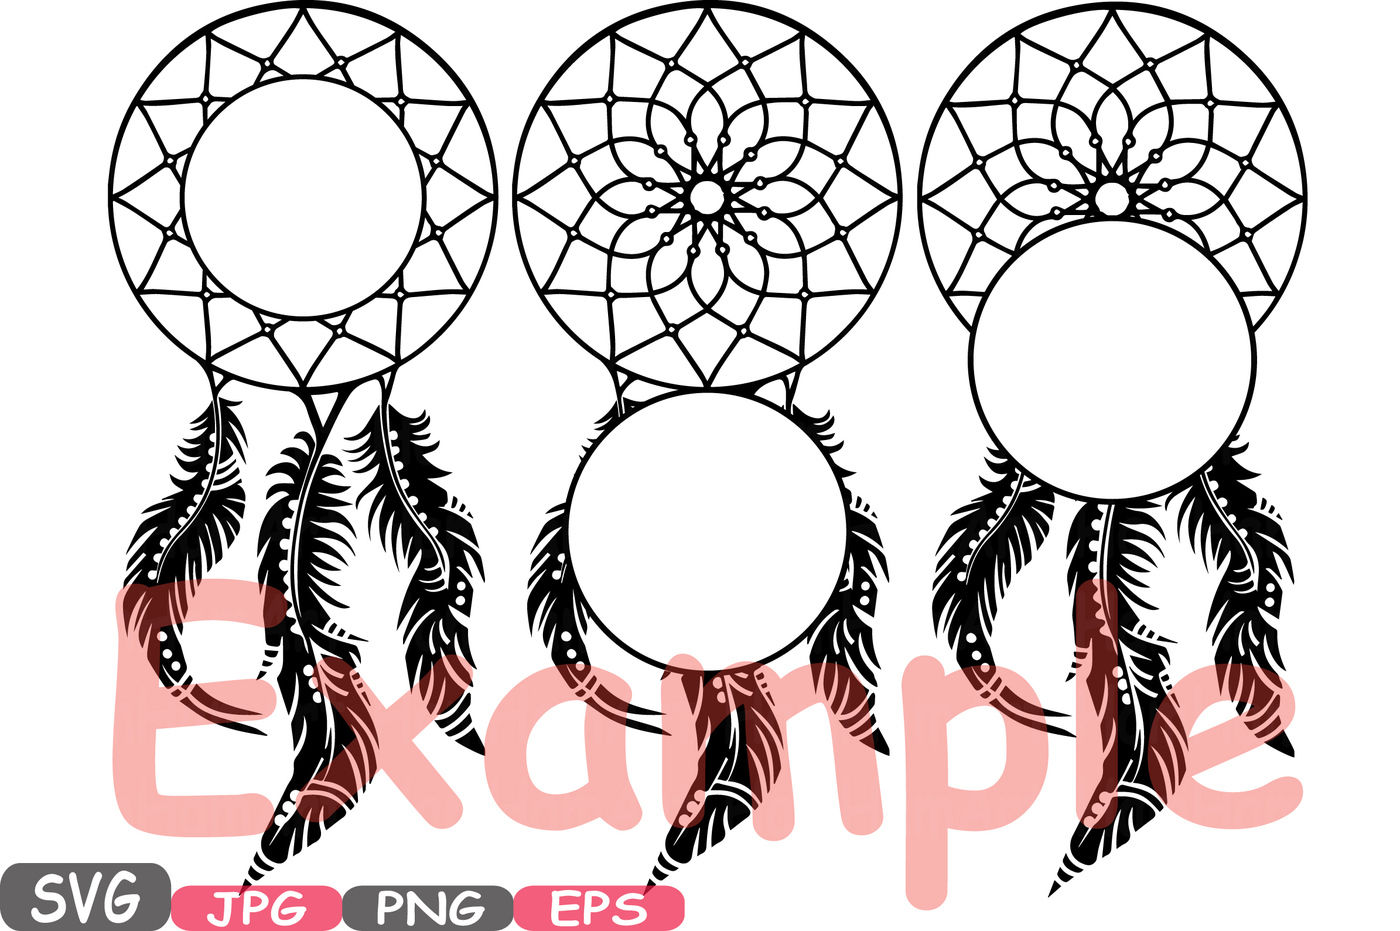 Dream Catcher Circle Svg Monogram Silhouette Cutting Files Svg Frame Clipart Boho Bohemian Dream Designs Feathers Pack Indian Native 500s By Hamhamart Thehungryjpeg Com